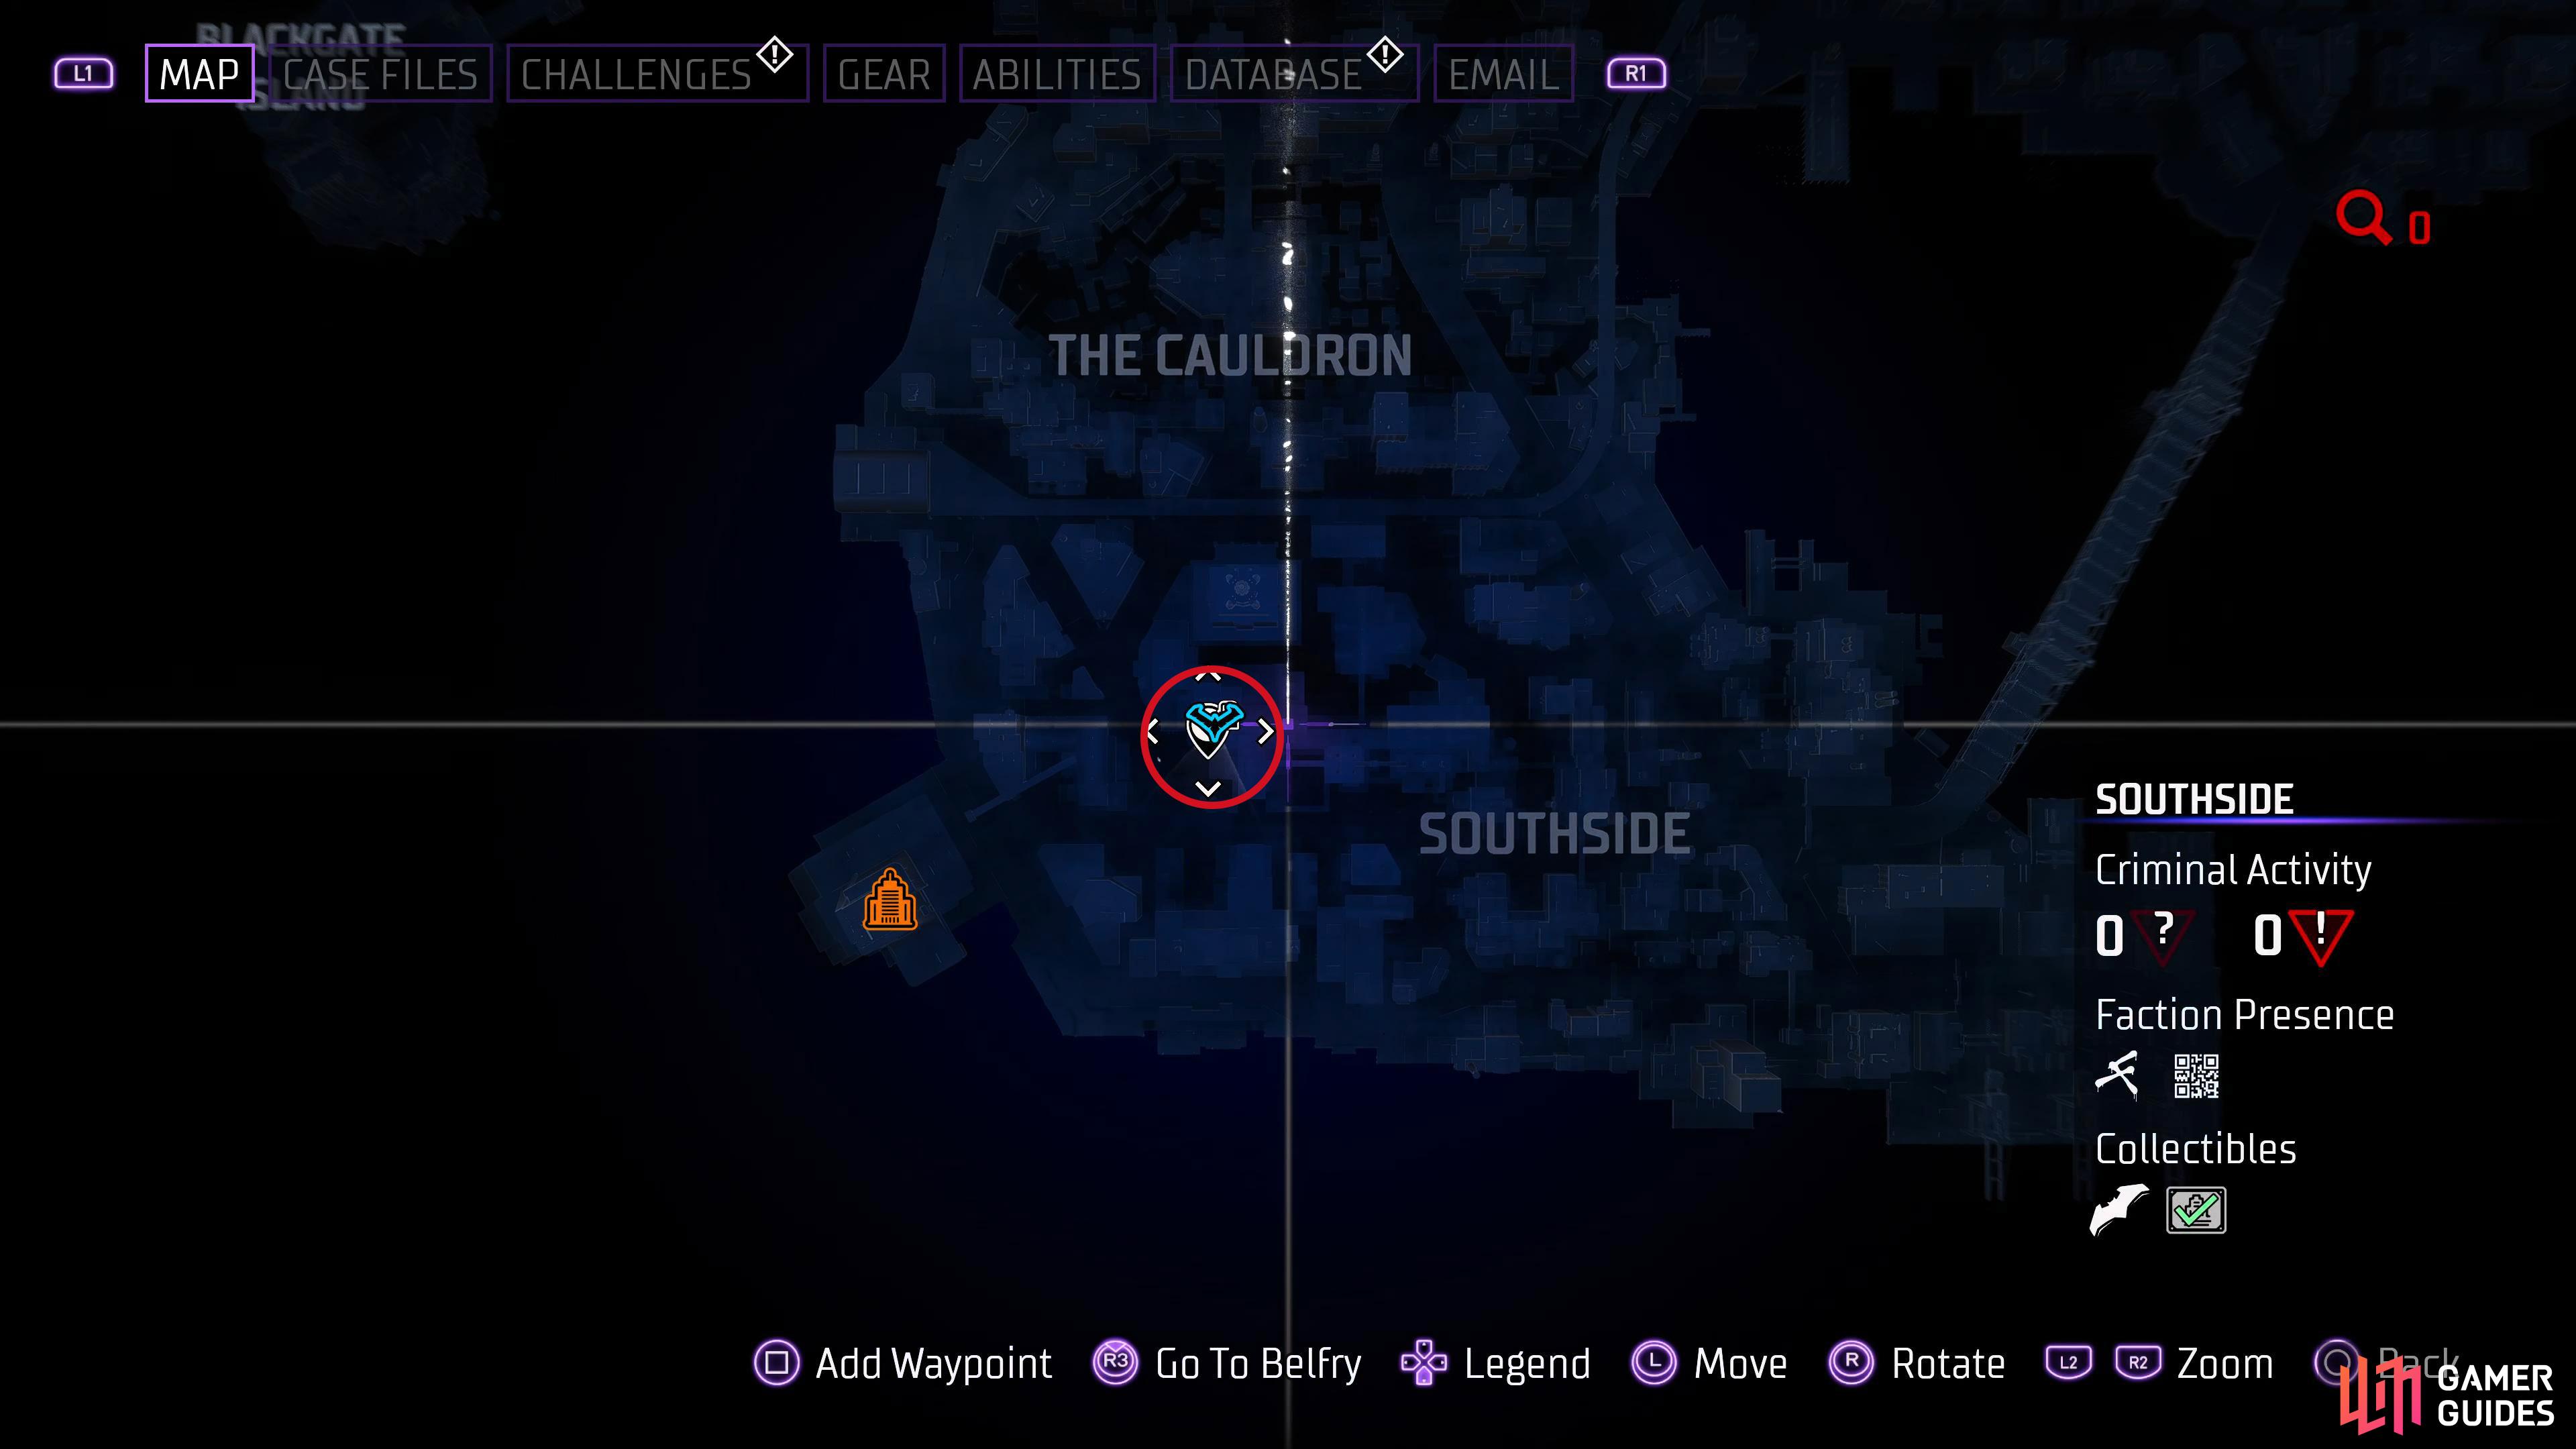 You can find the Fast Travel secure drone location in Southside just south of Cobblepot Steel.